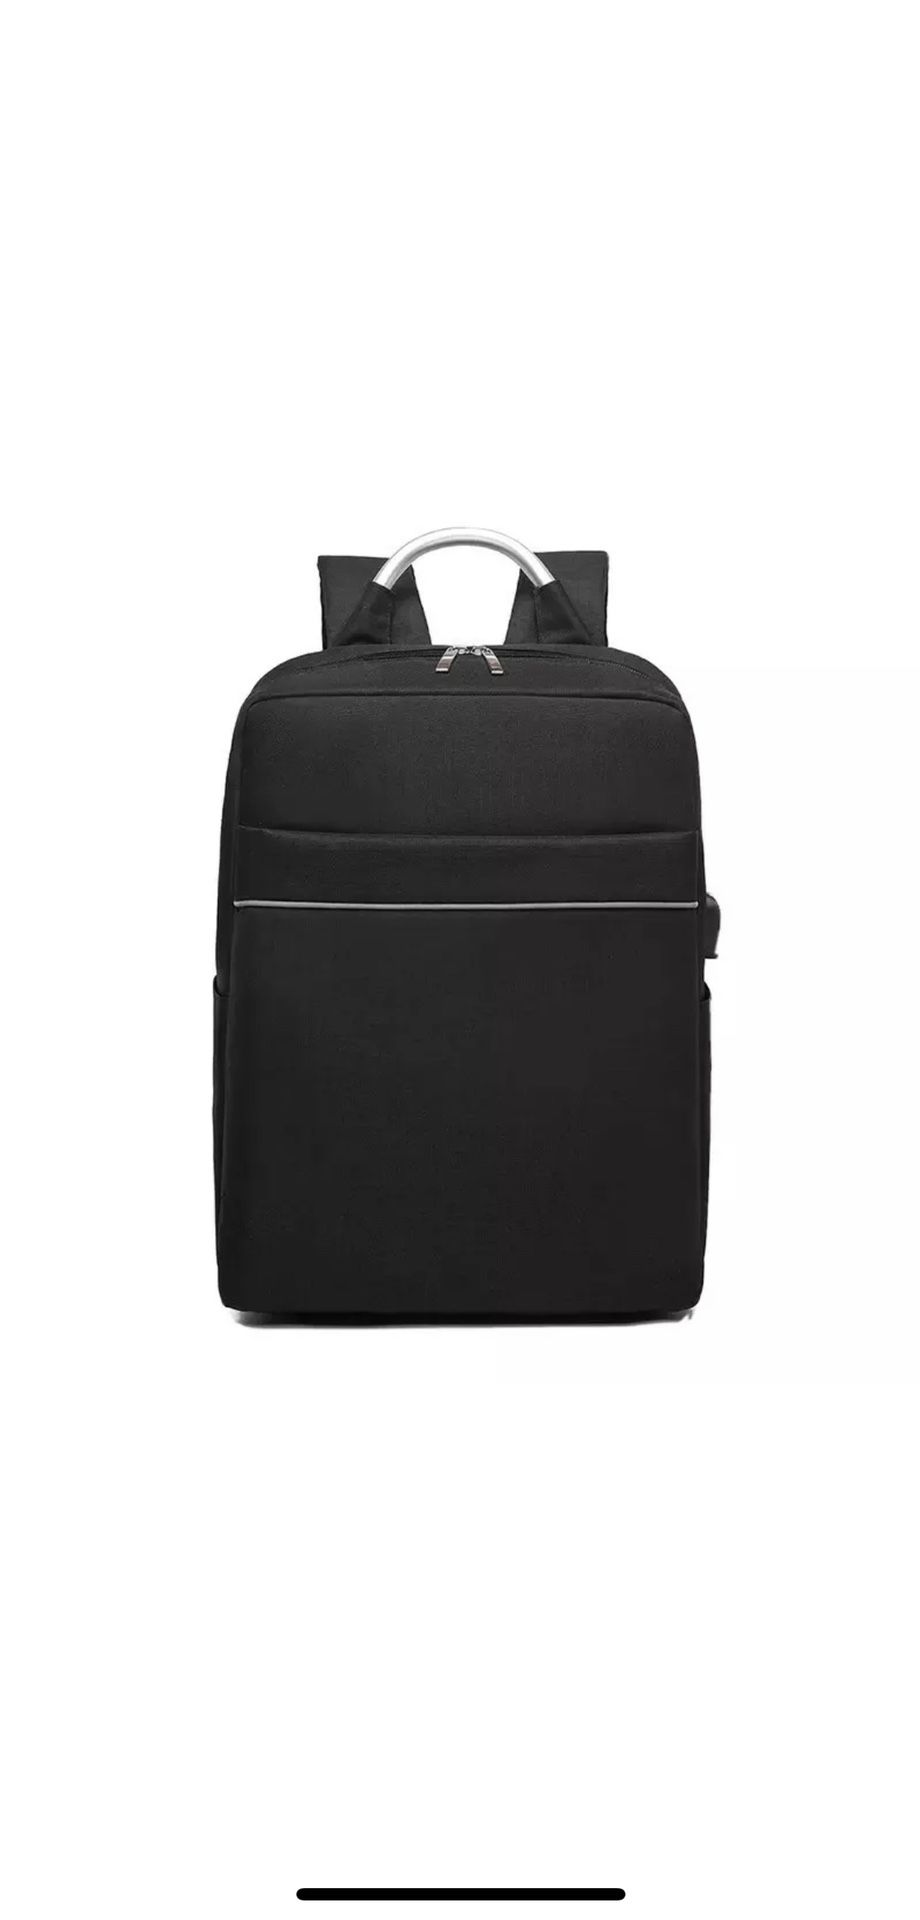 laptop  /school / Travel    backpack with usb charging port